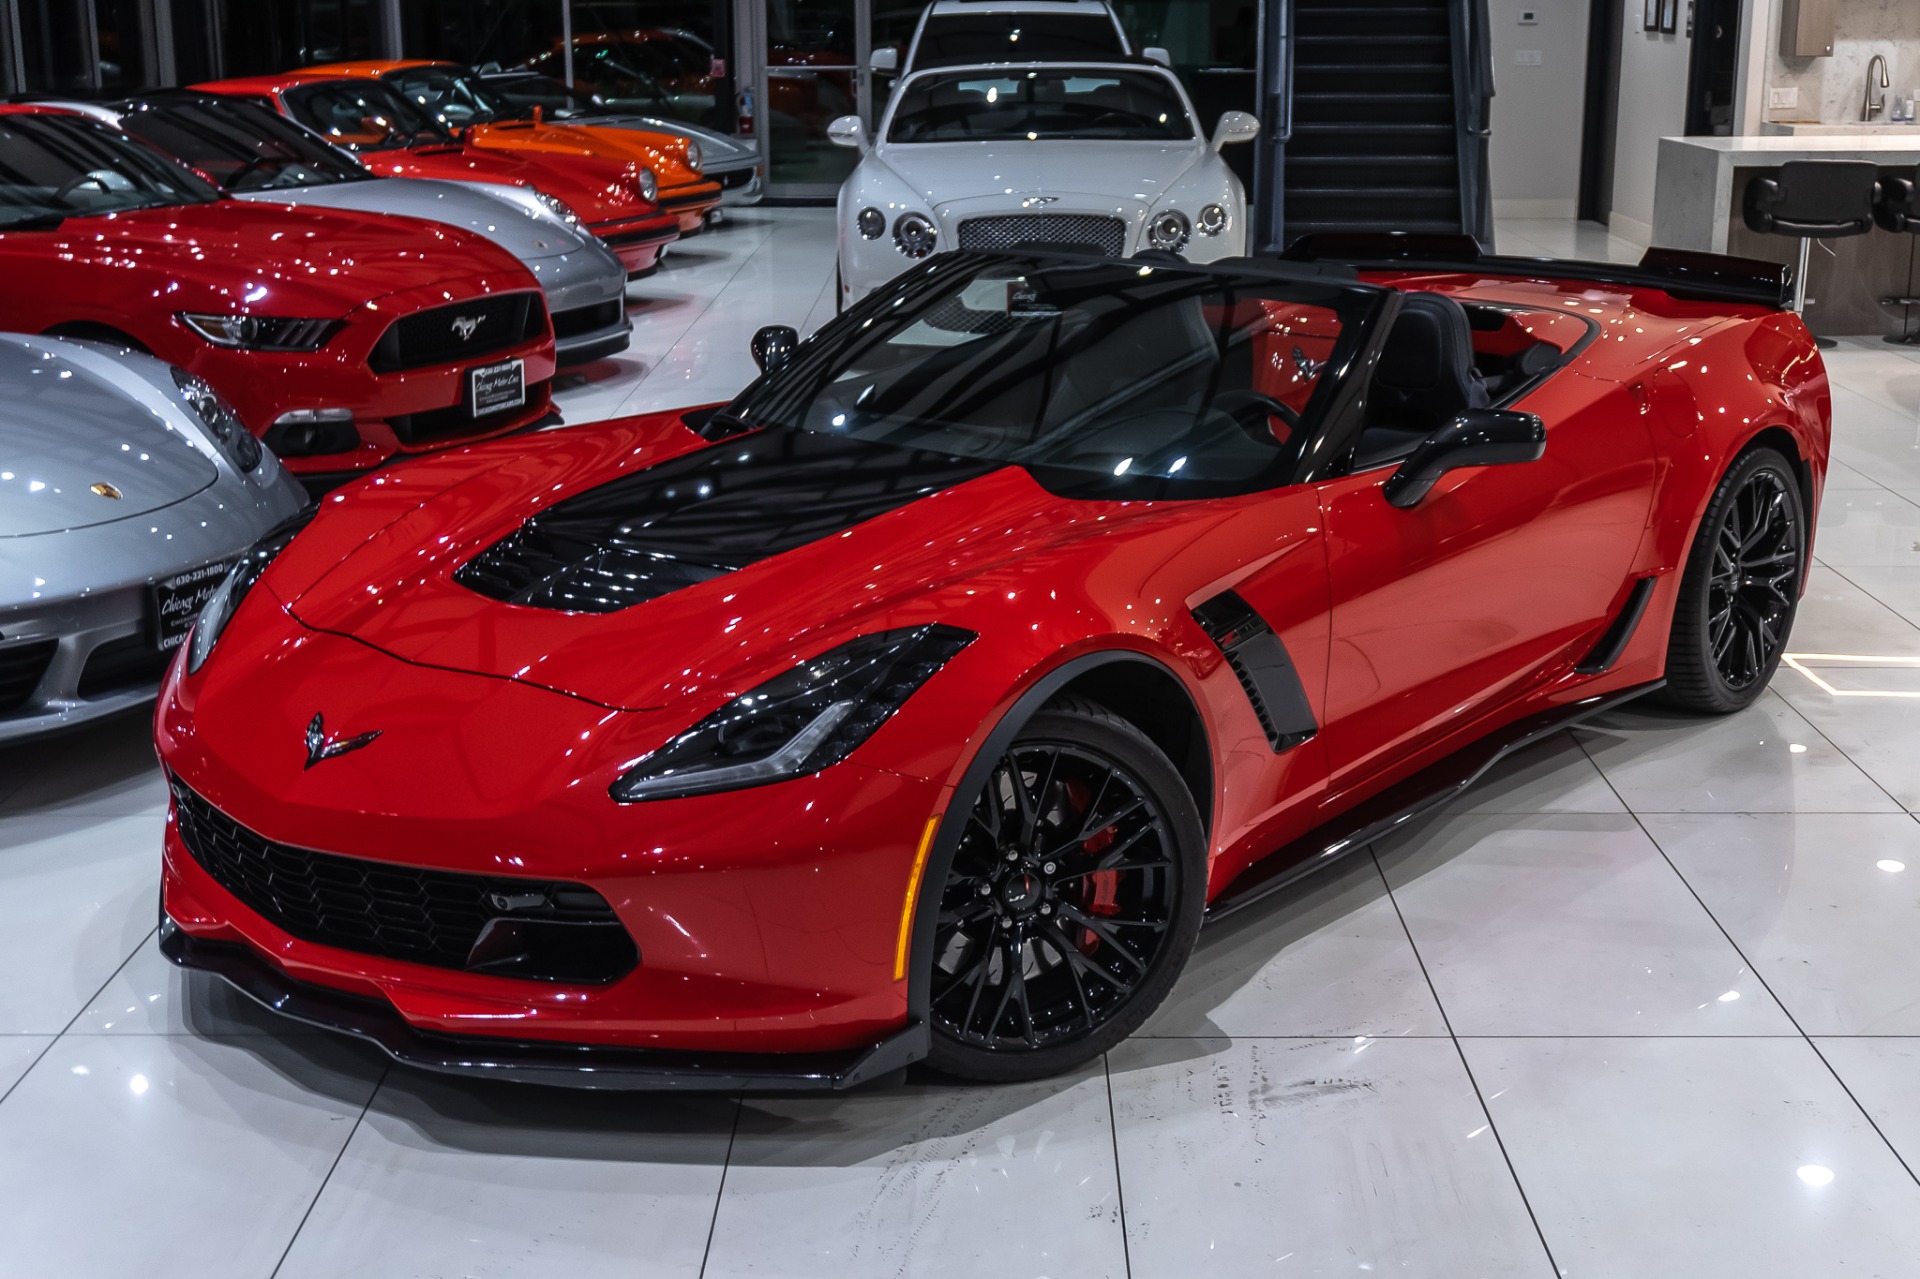 Used-2016-Chevrolet-Corvette-Z06-2LZ-Convertible-MSRP-96970-CARBON-FLASH-GROUND-EFFECTS